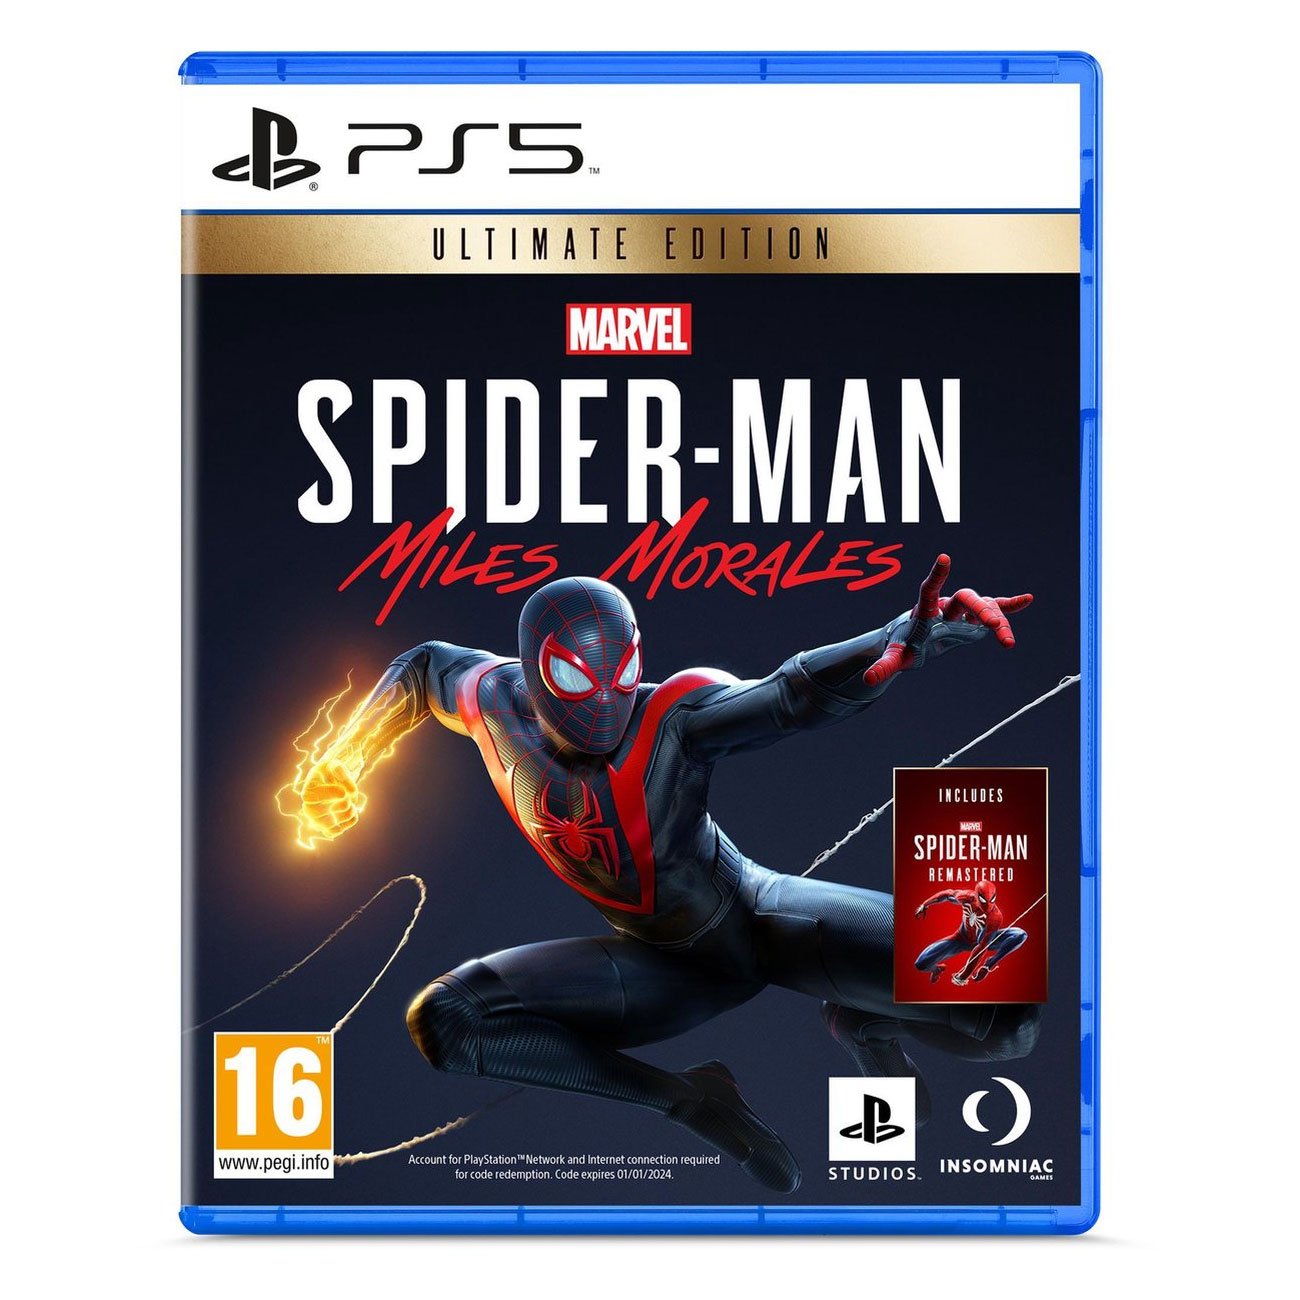 Marvel’s Spider-Man: Miles Morales PS5 Cover